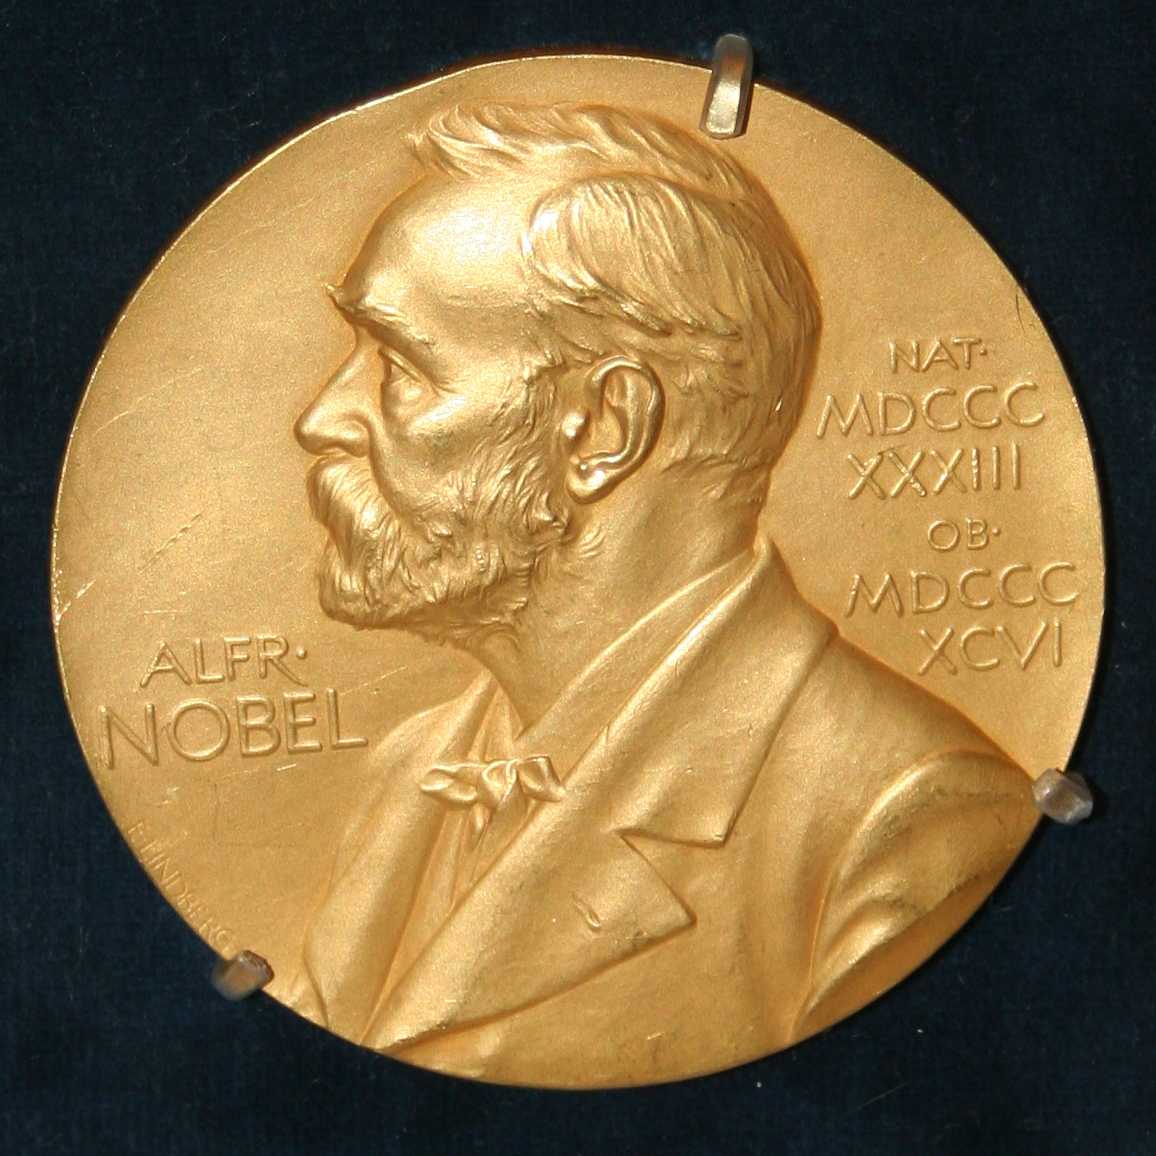 Modern Nobel Prize medals are struck in 18 carat green gold, a naturally occurring alloy of silver and gold, and plated with 24 carat gold.